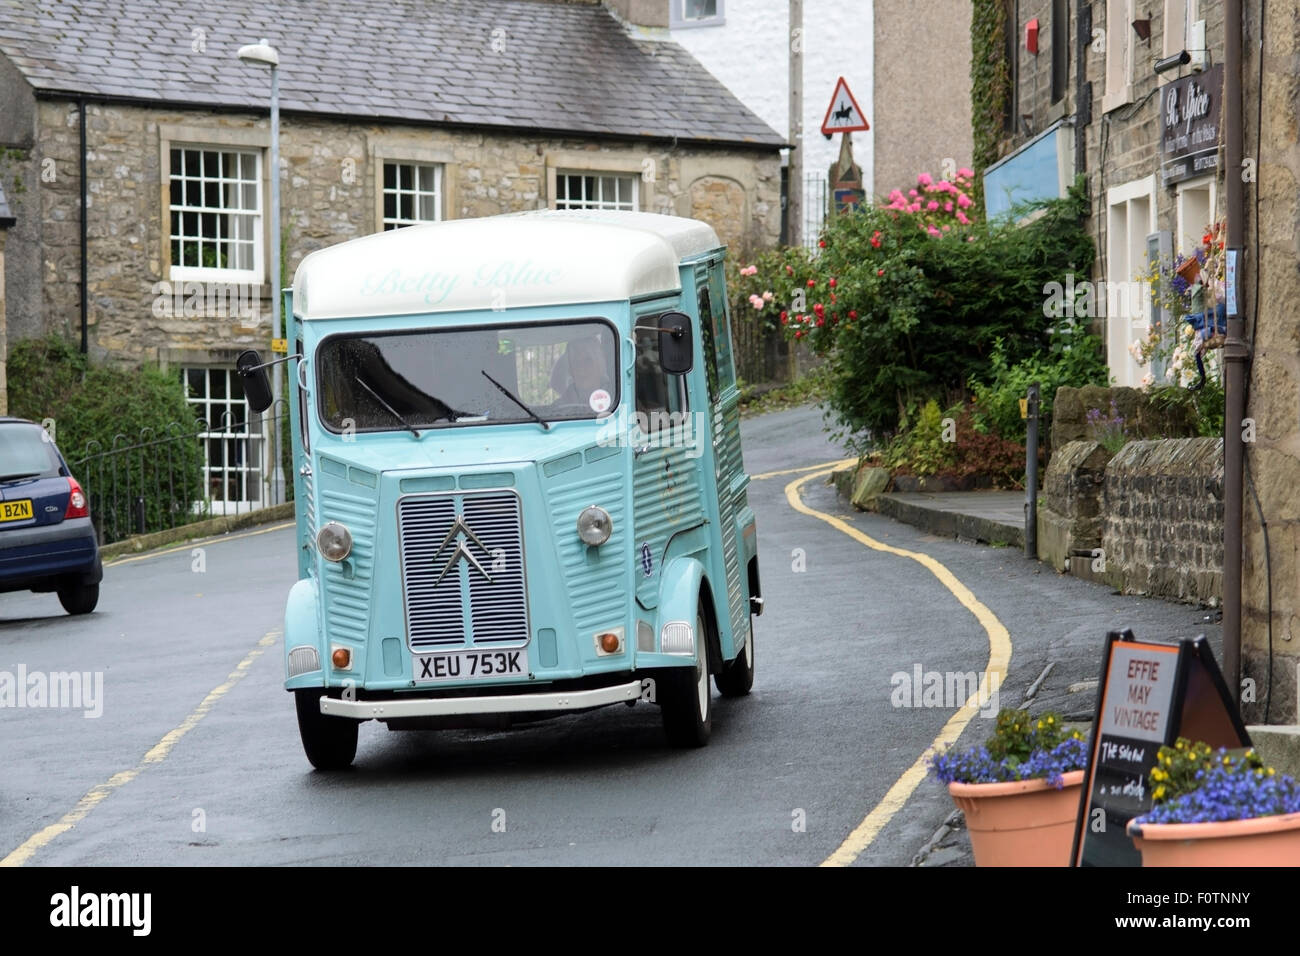 A 1971 Citroen HY van being used as a pet walking transporter in Settle, Yorkshire Dales National Park, England, UK Stock Photo